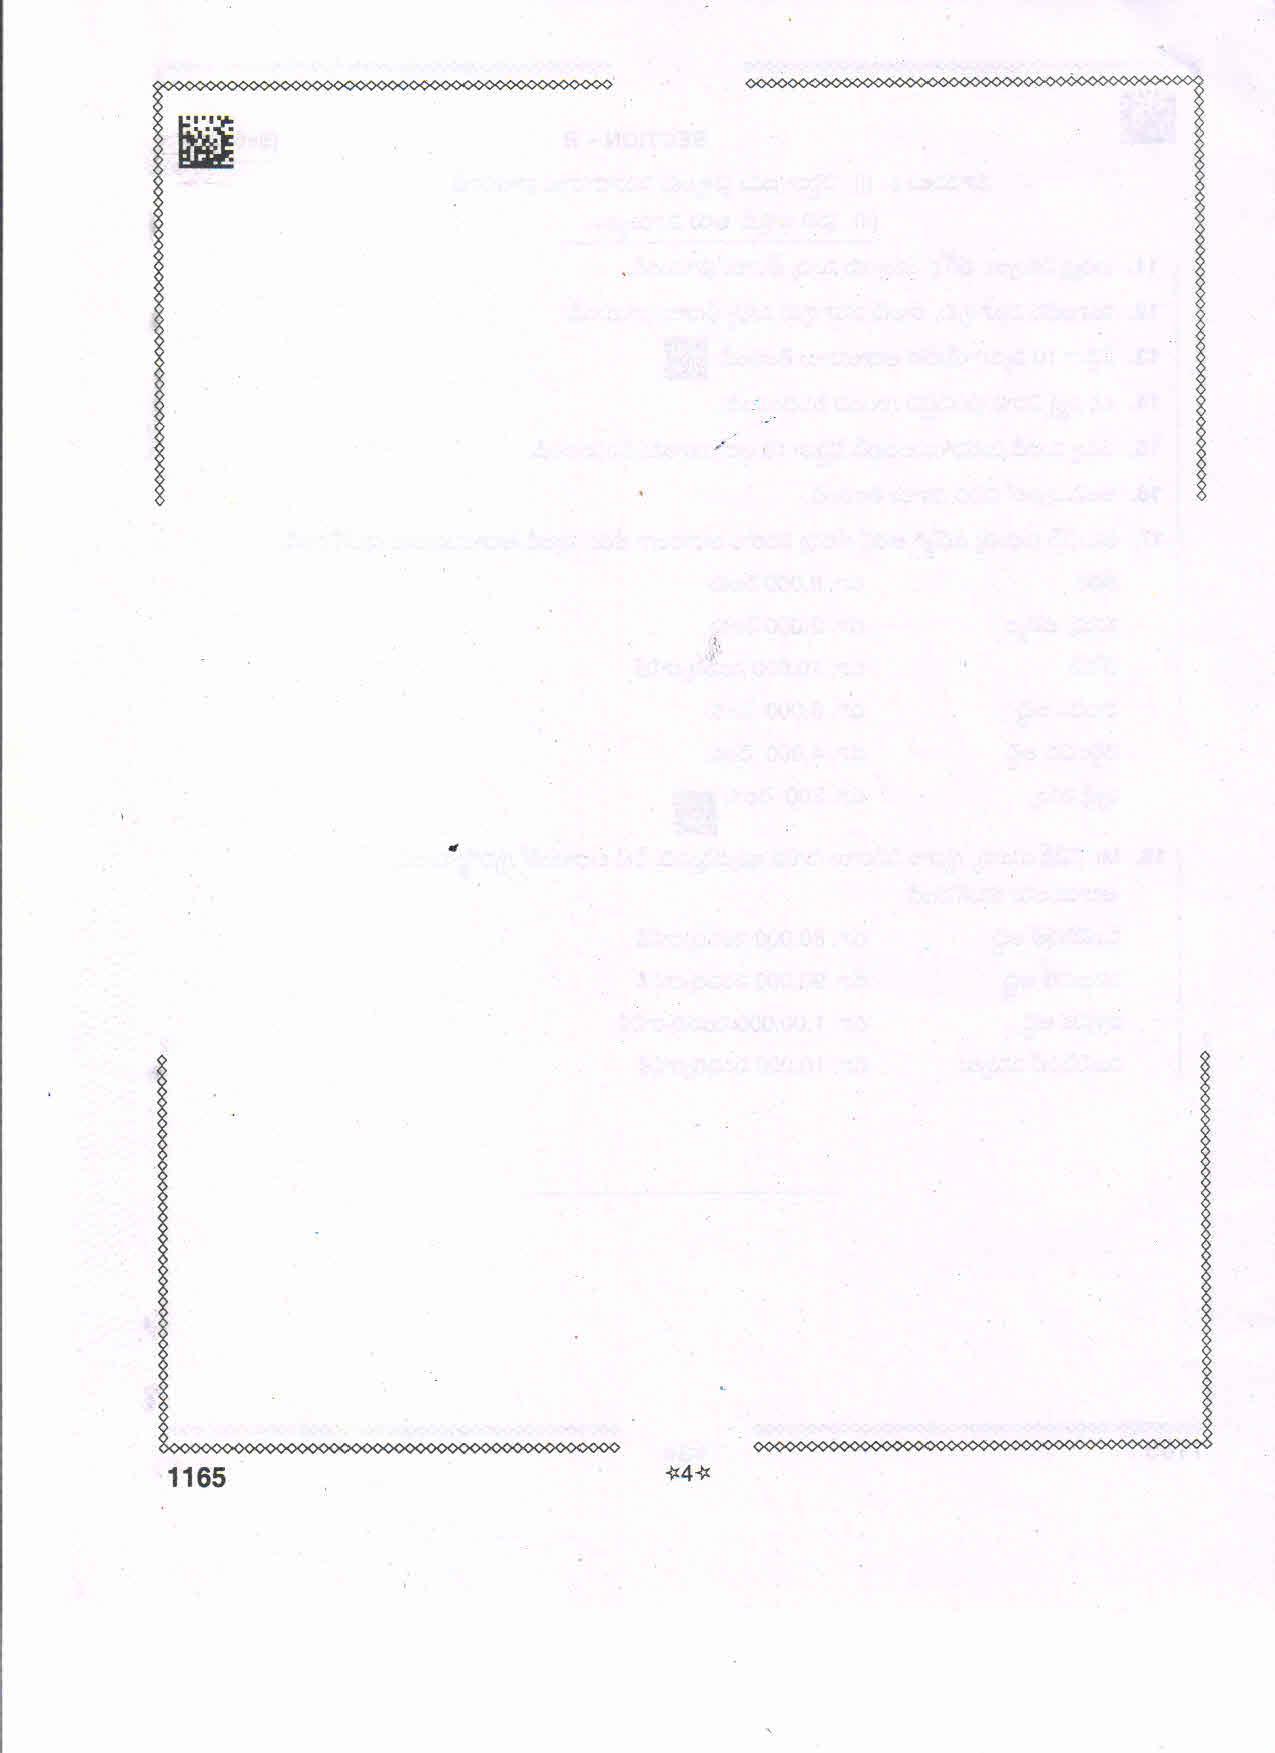 AP Intermediate 2nd Year Vocational Question Paper September-2021 - Taxation-I - Page 4